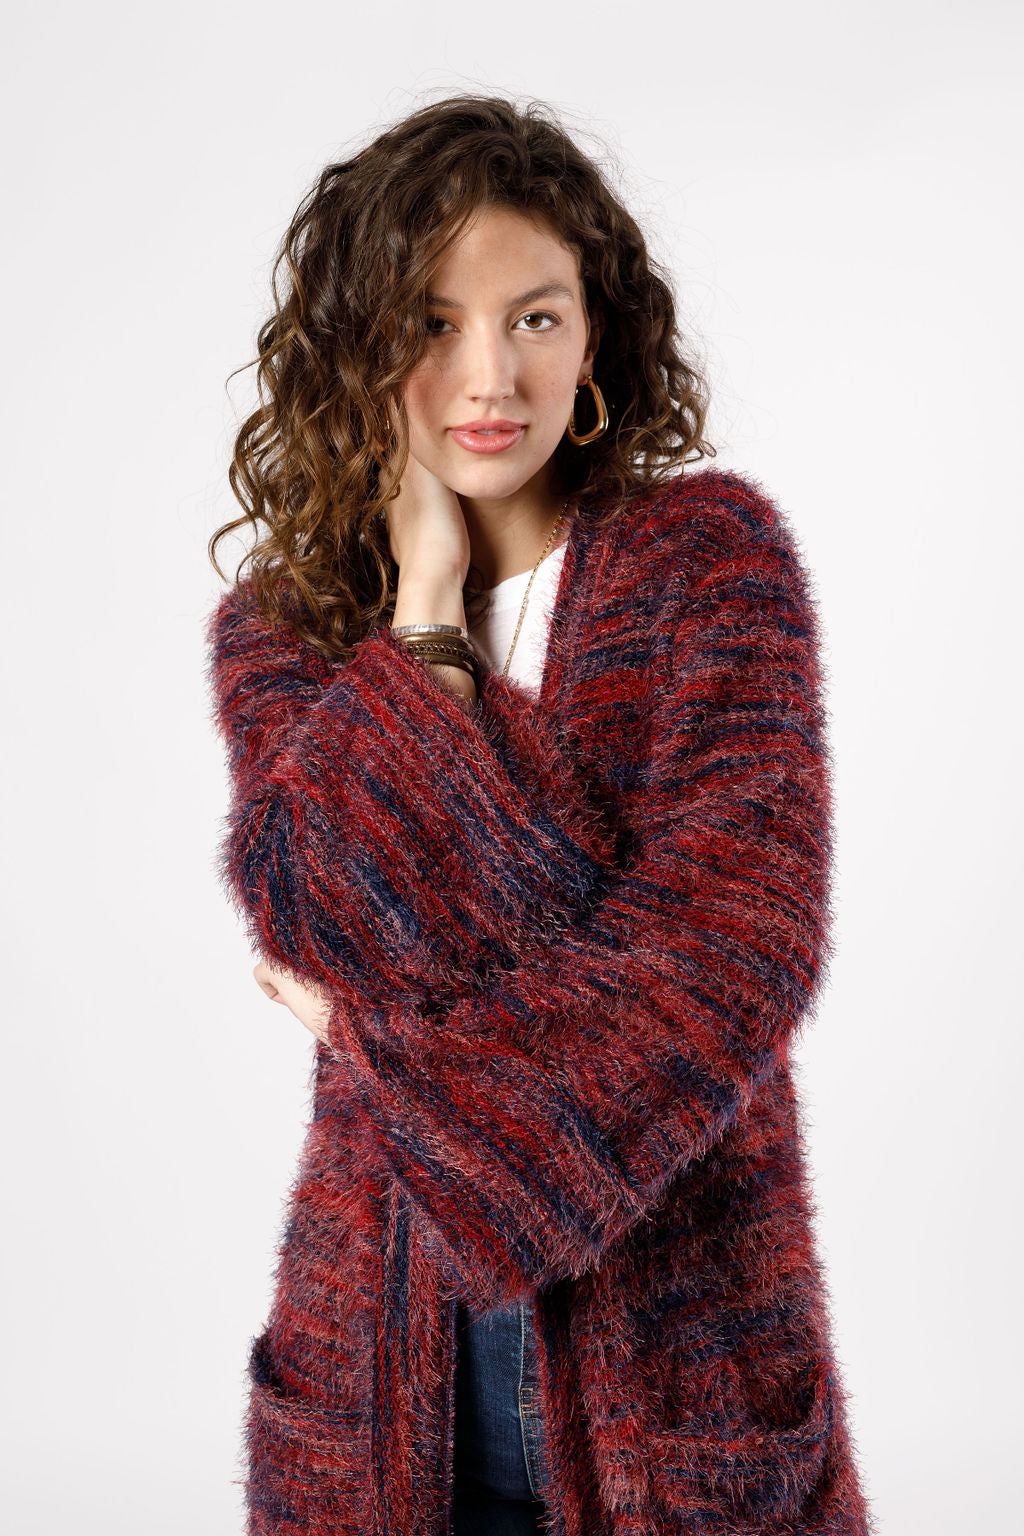 Band of The Free Find A Way Cable Stitch Sweater in Red